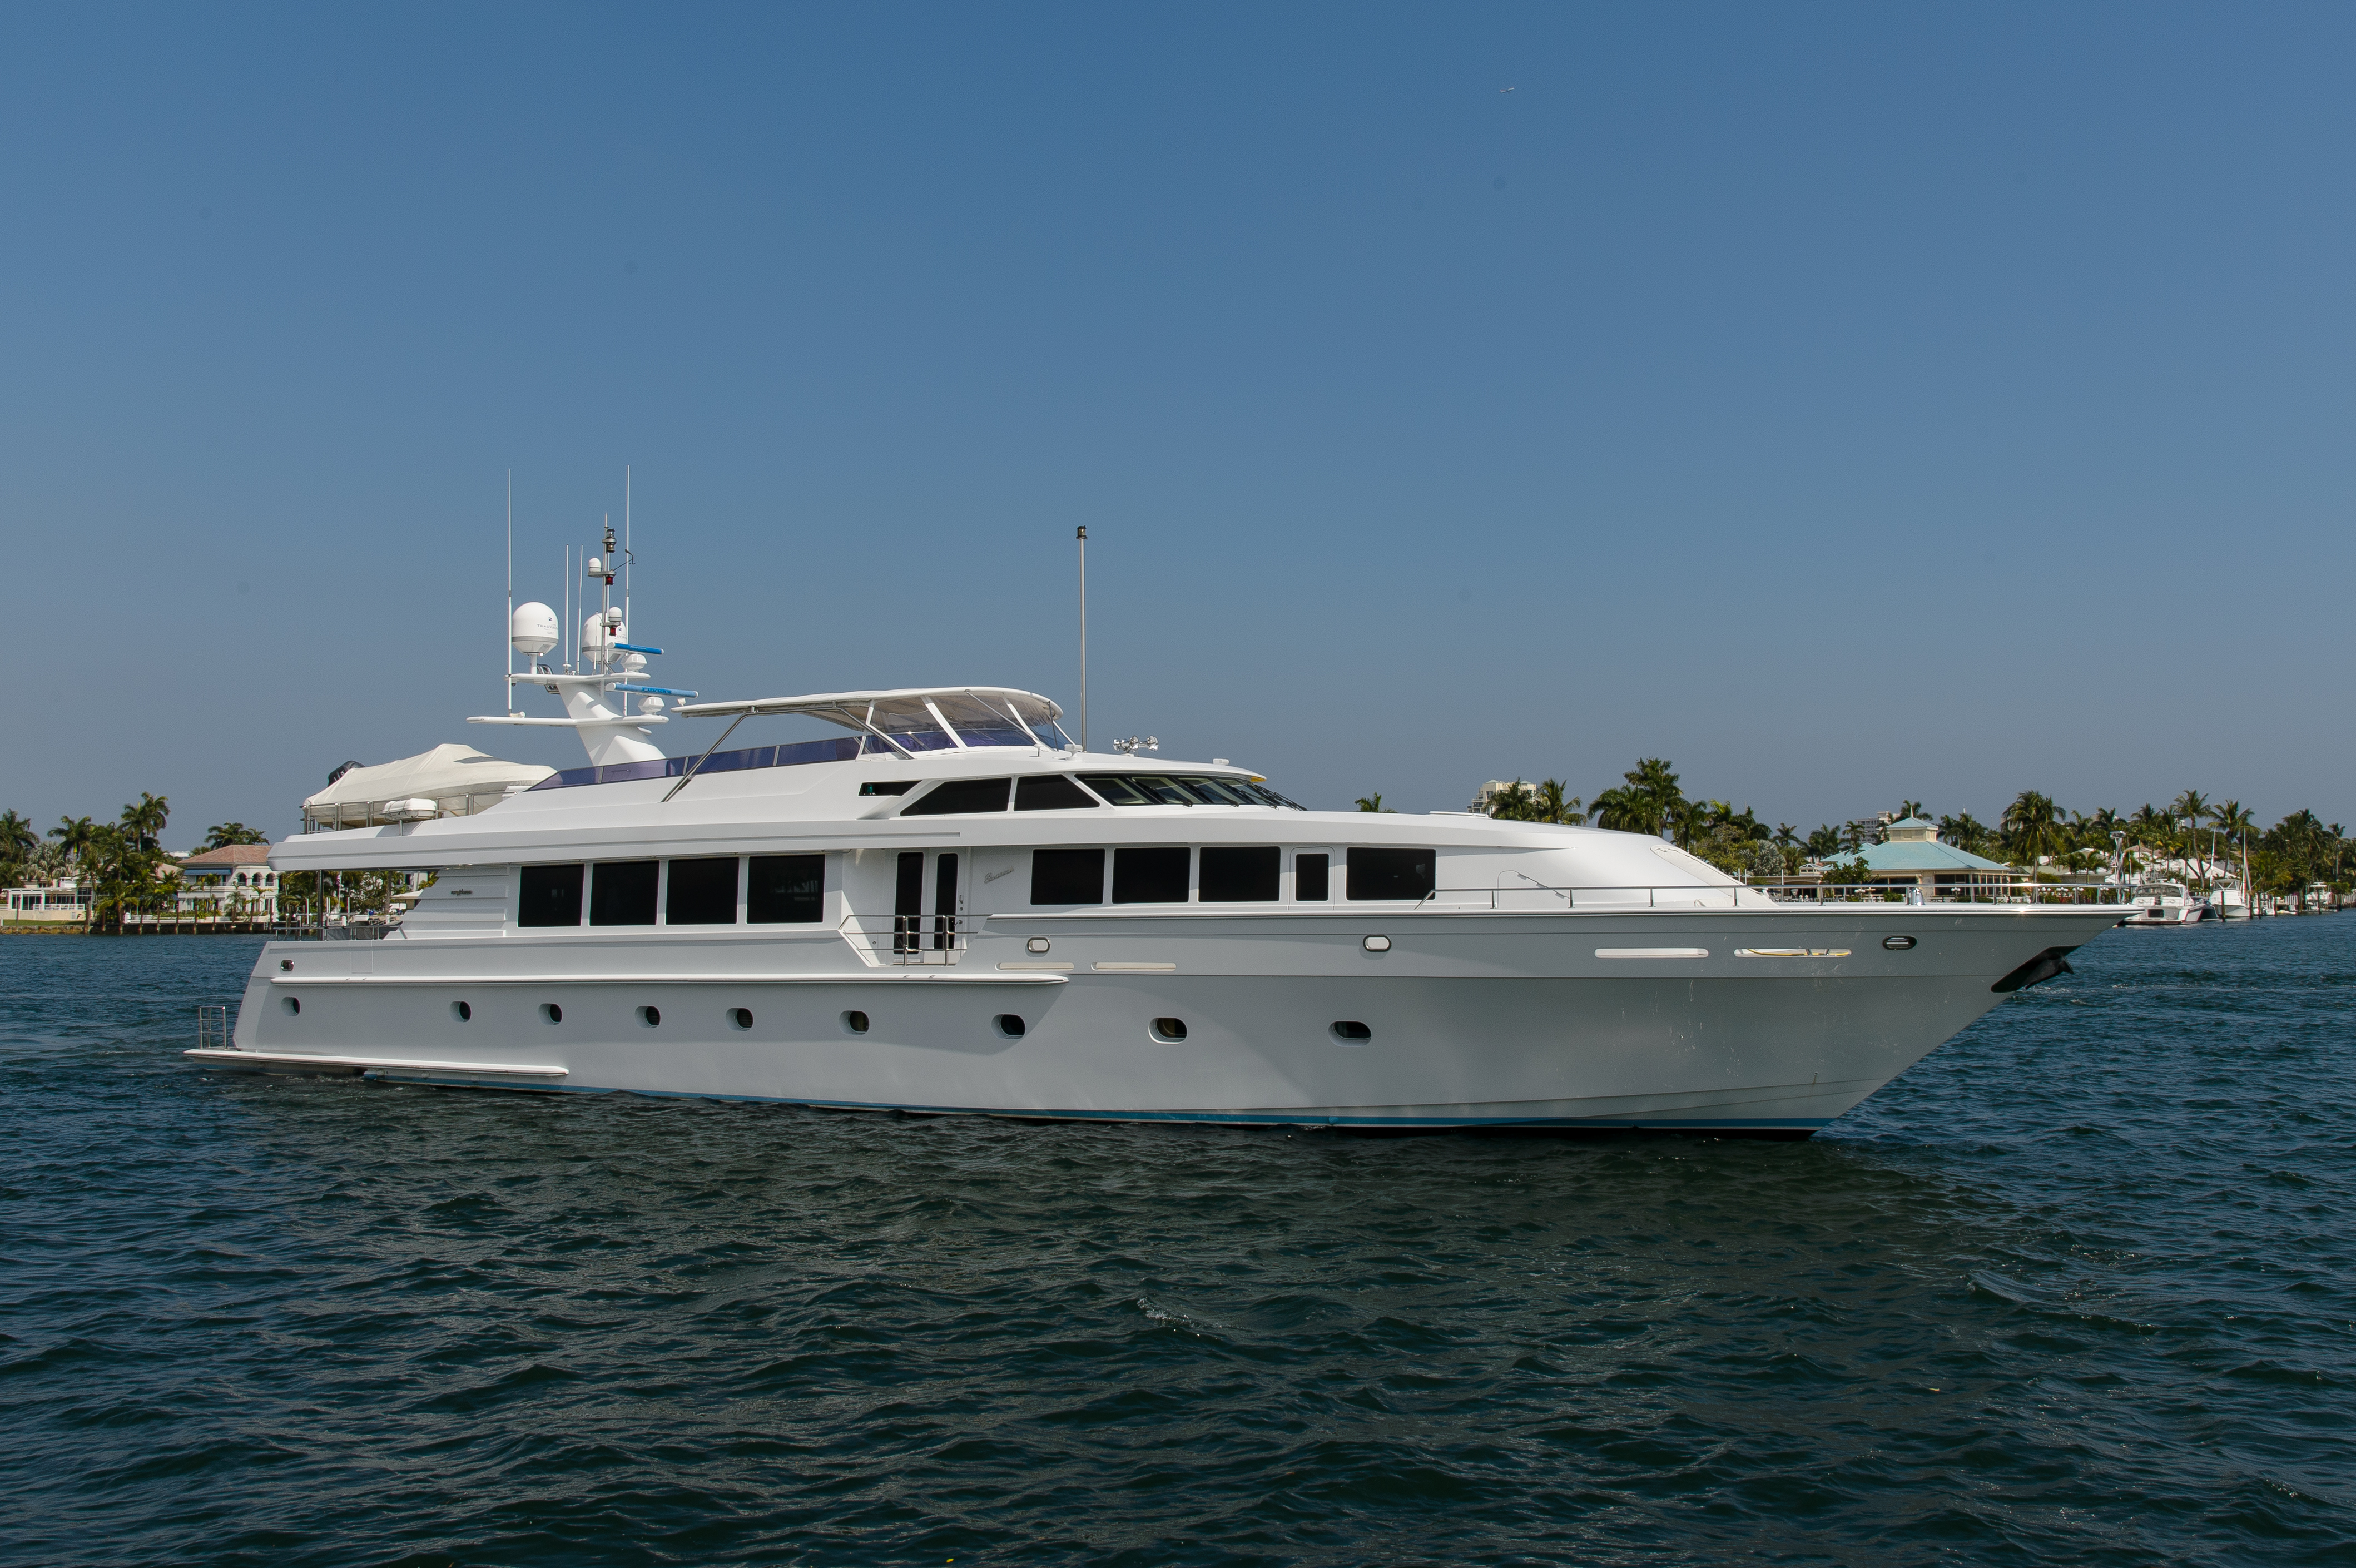 Savannah charter specs and number of guests